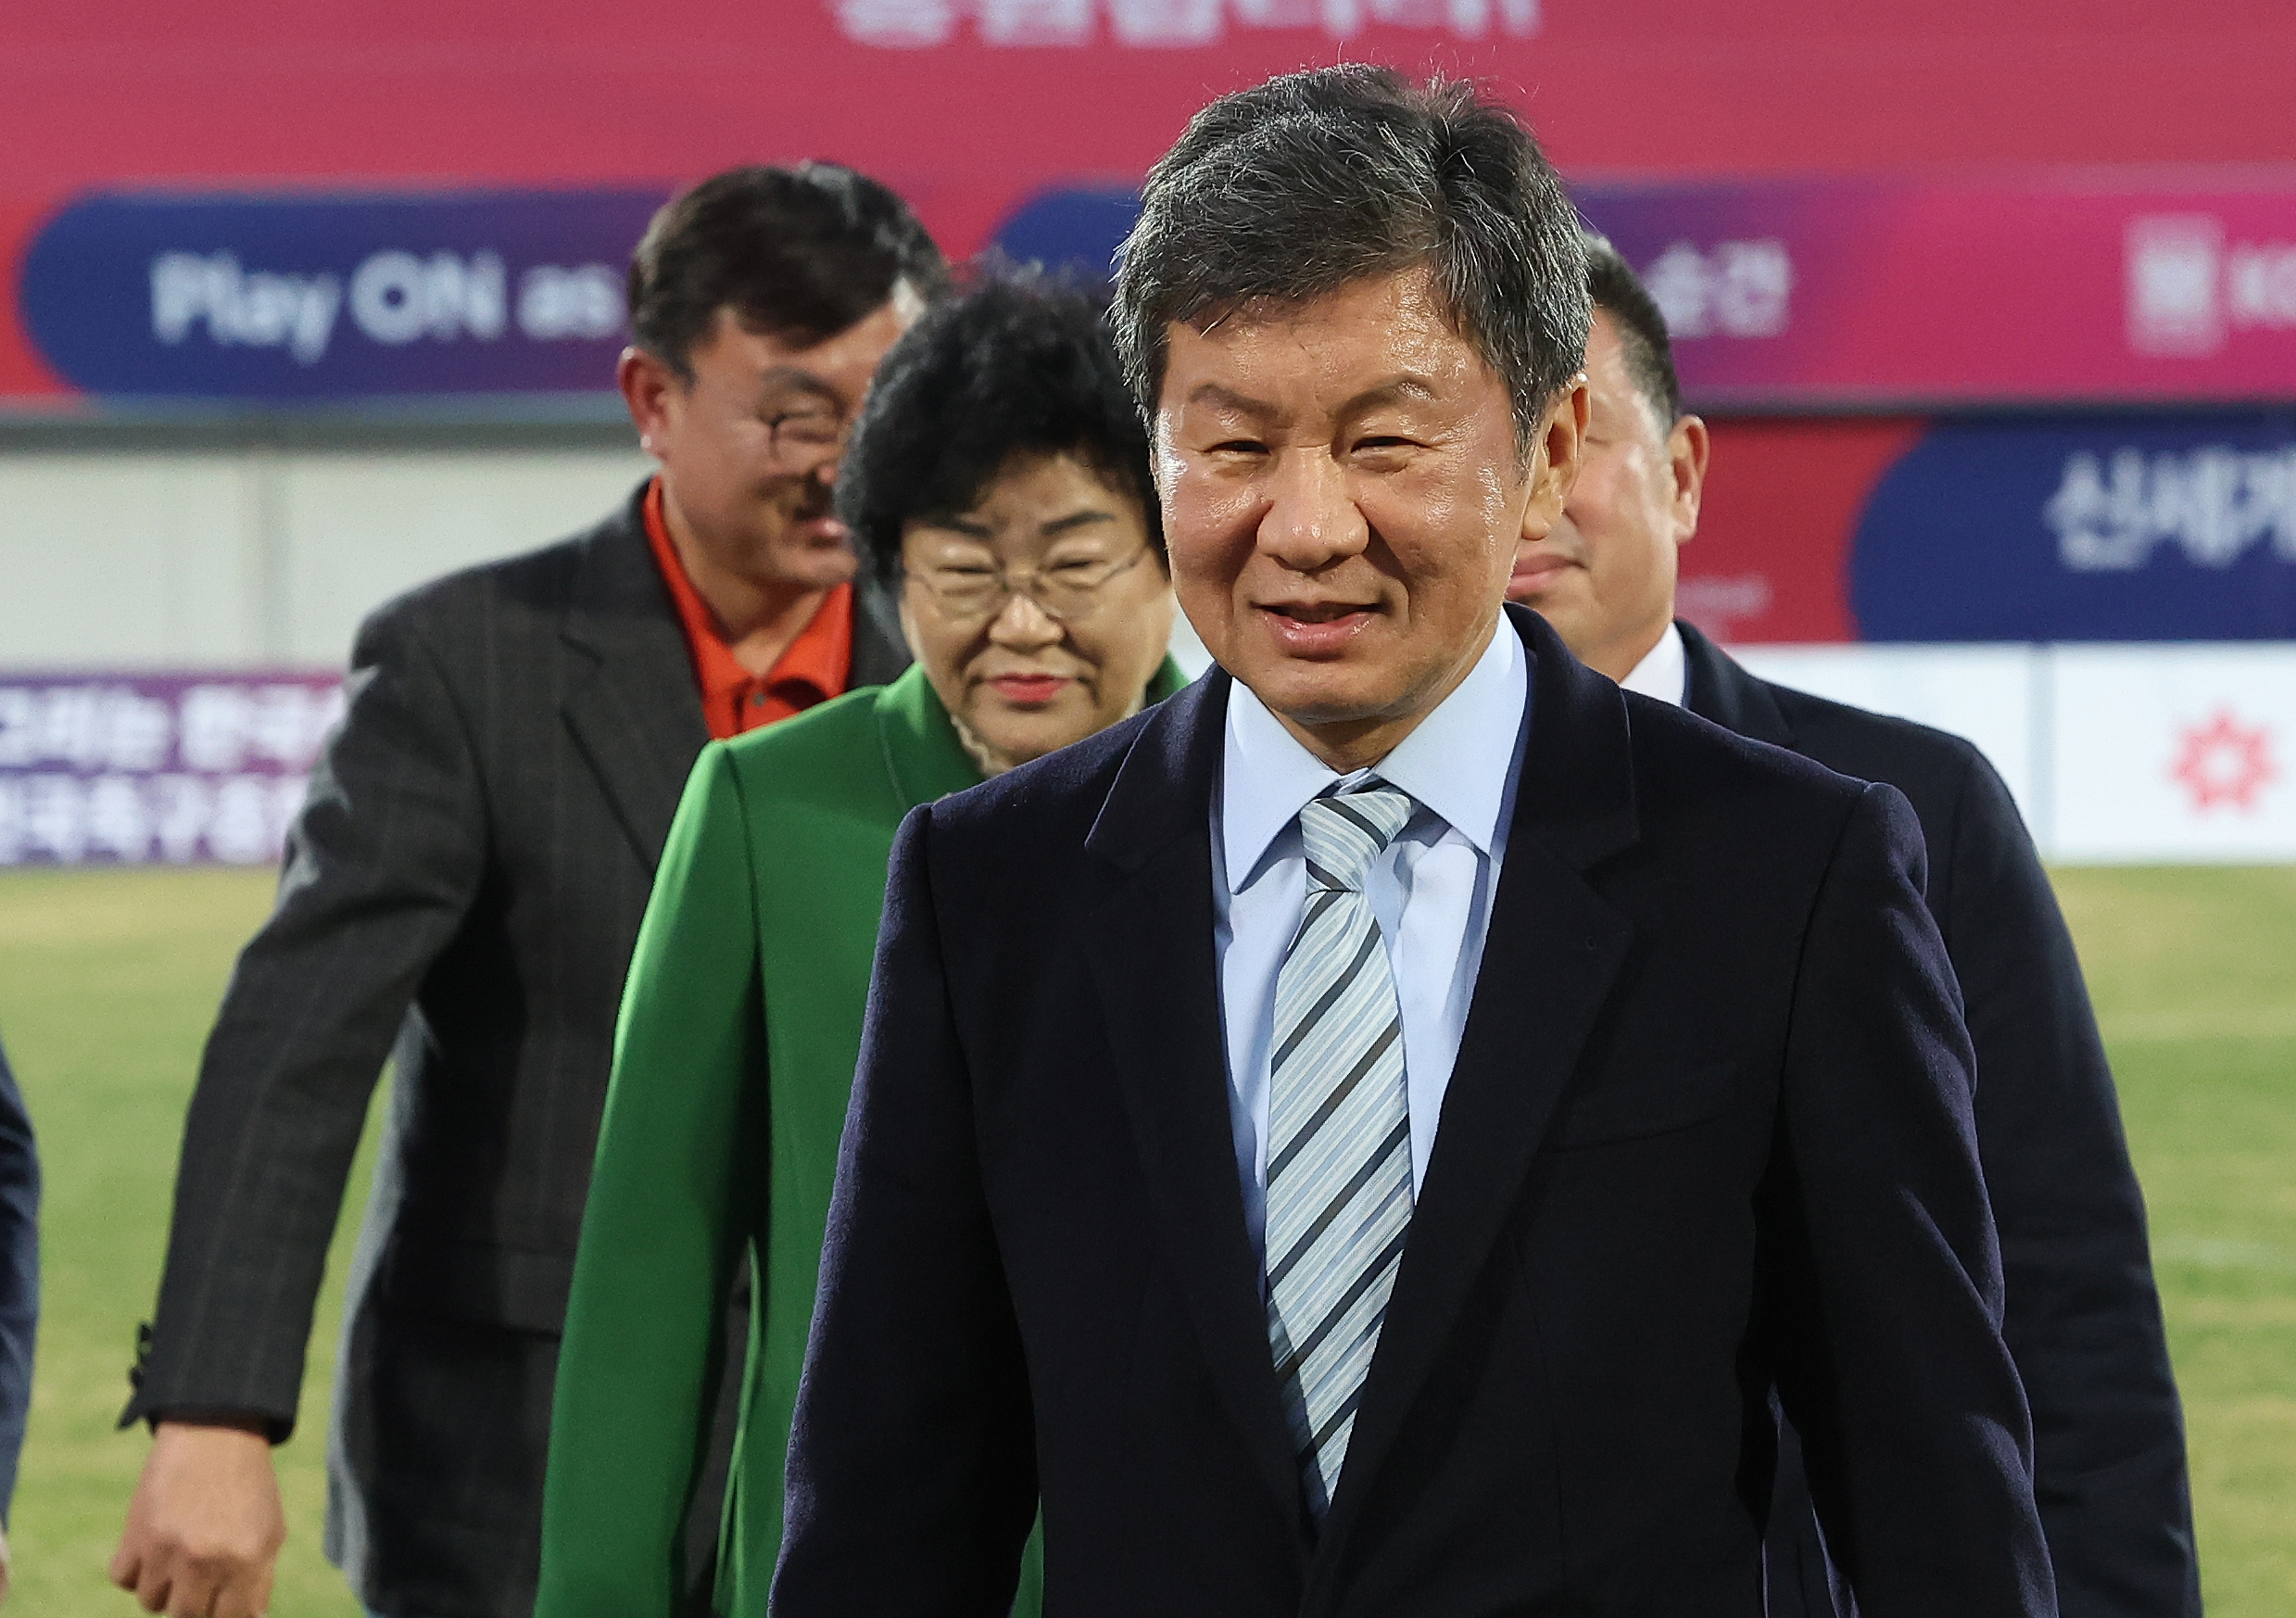 Korea Football Association President Chung Mong-gyu, who is equally responsible as the head of the Korean football world, visited the women's football evaluation match held in Icheon on the 5th.  yunhap news